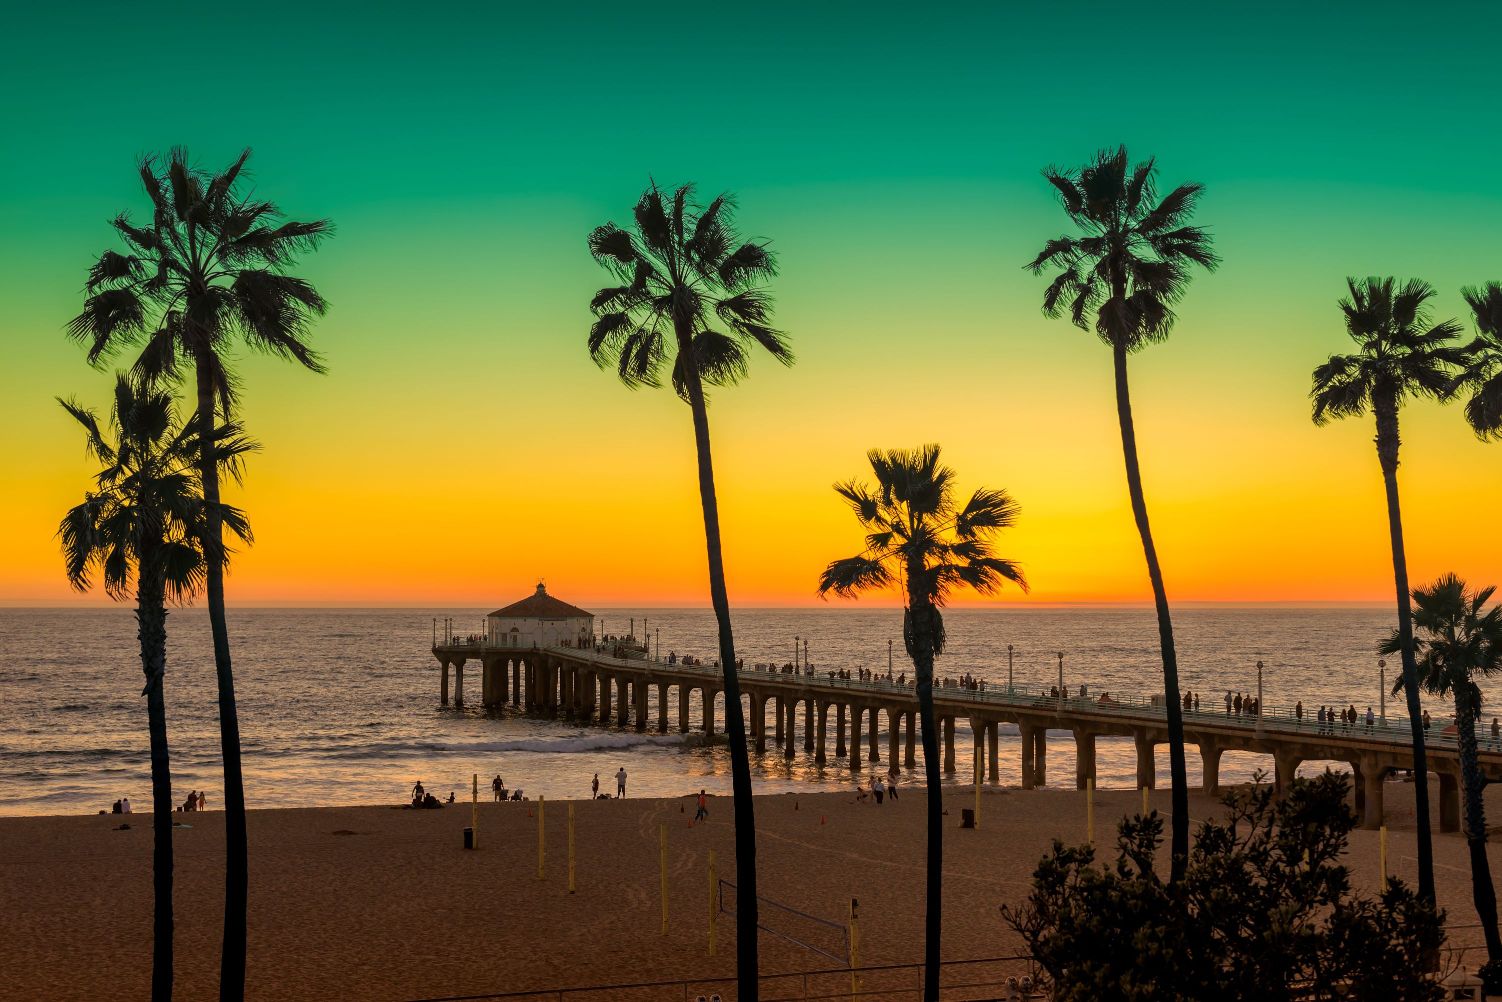 Pier and palm trees on the coast during the sunset